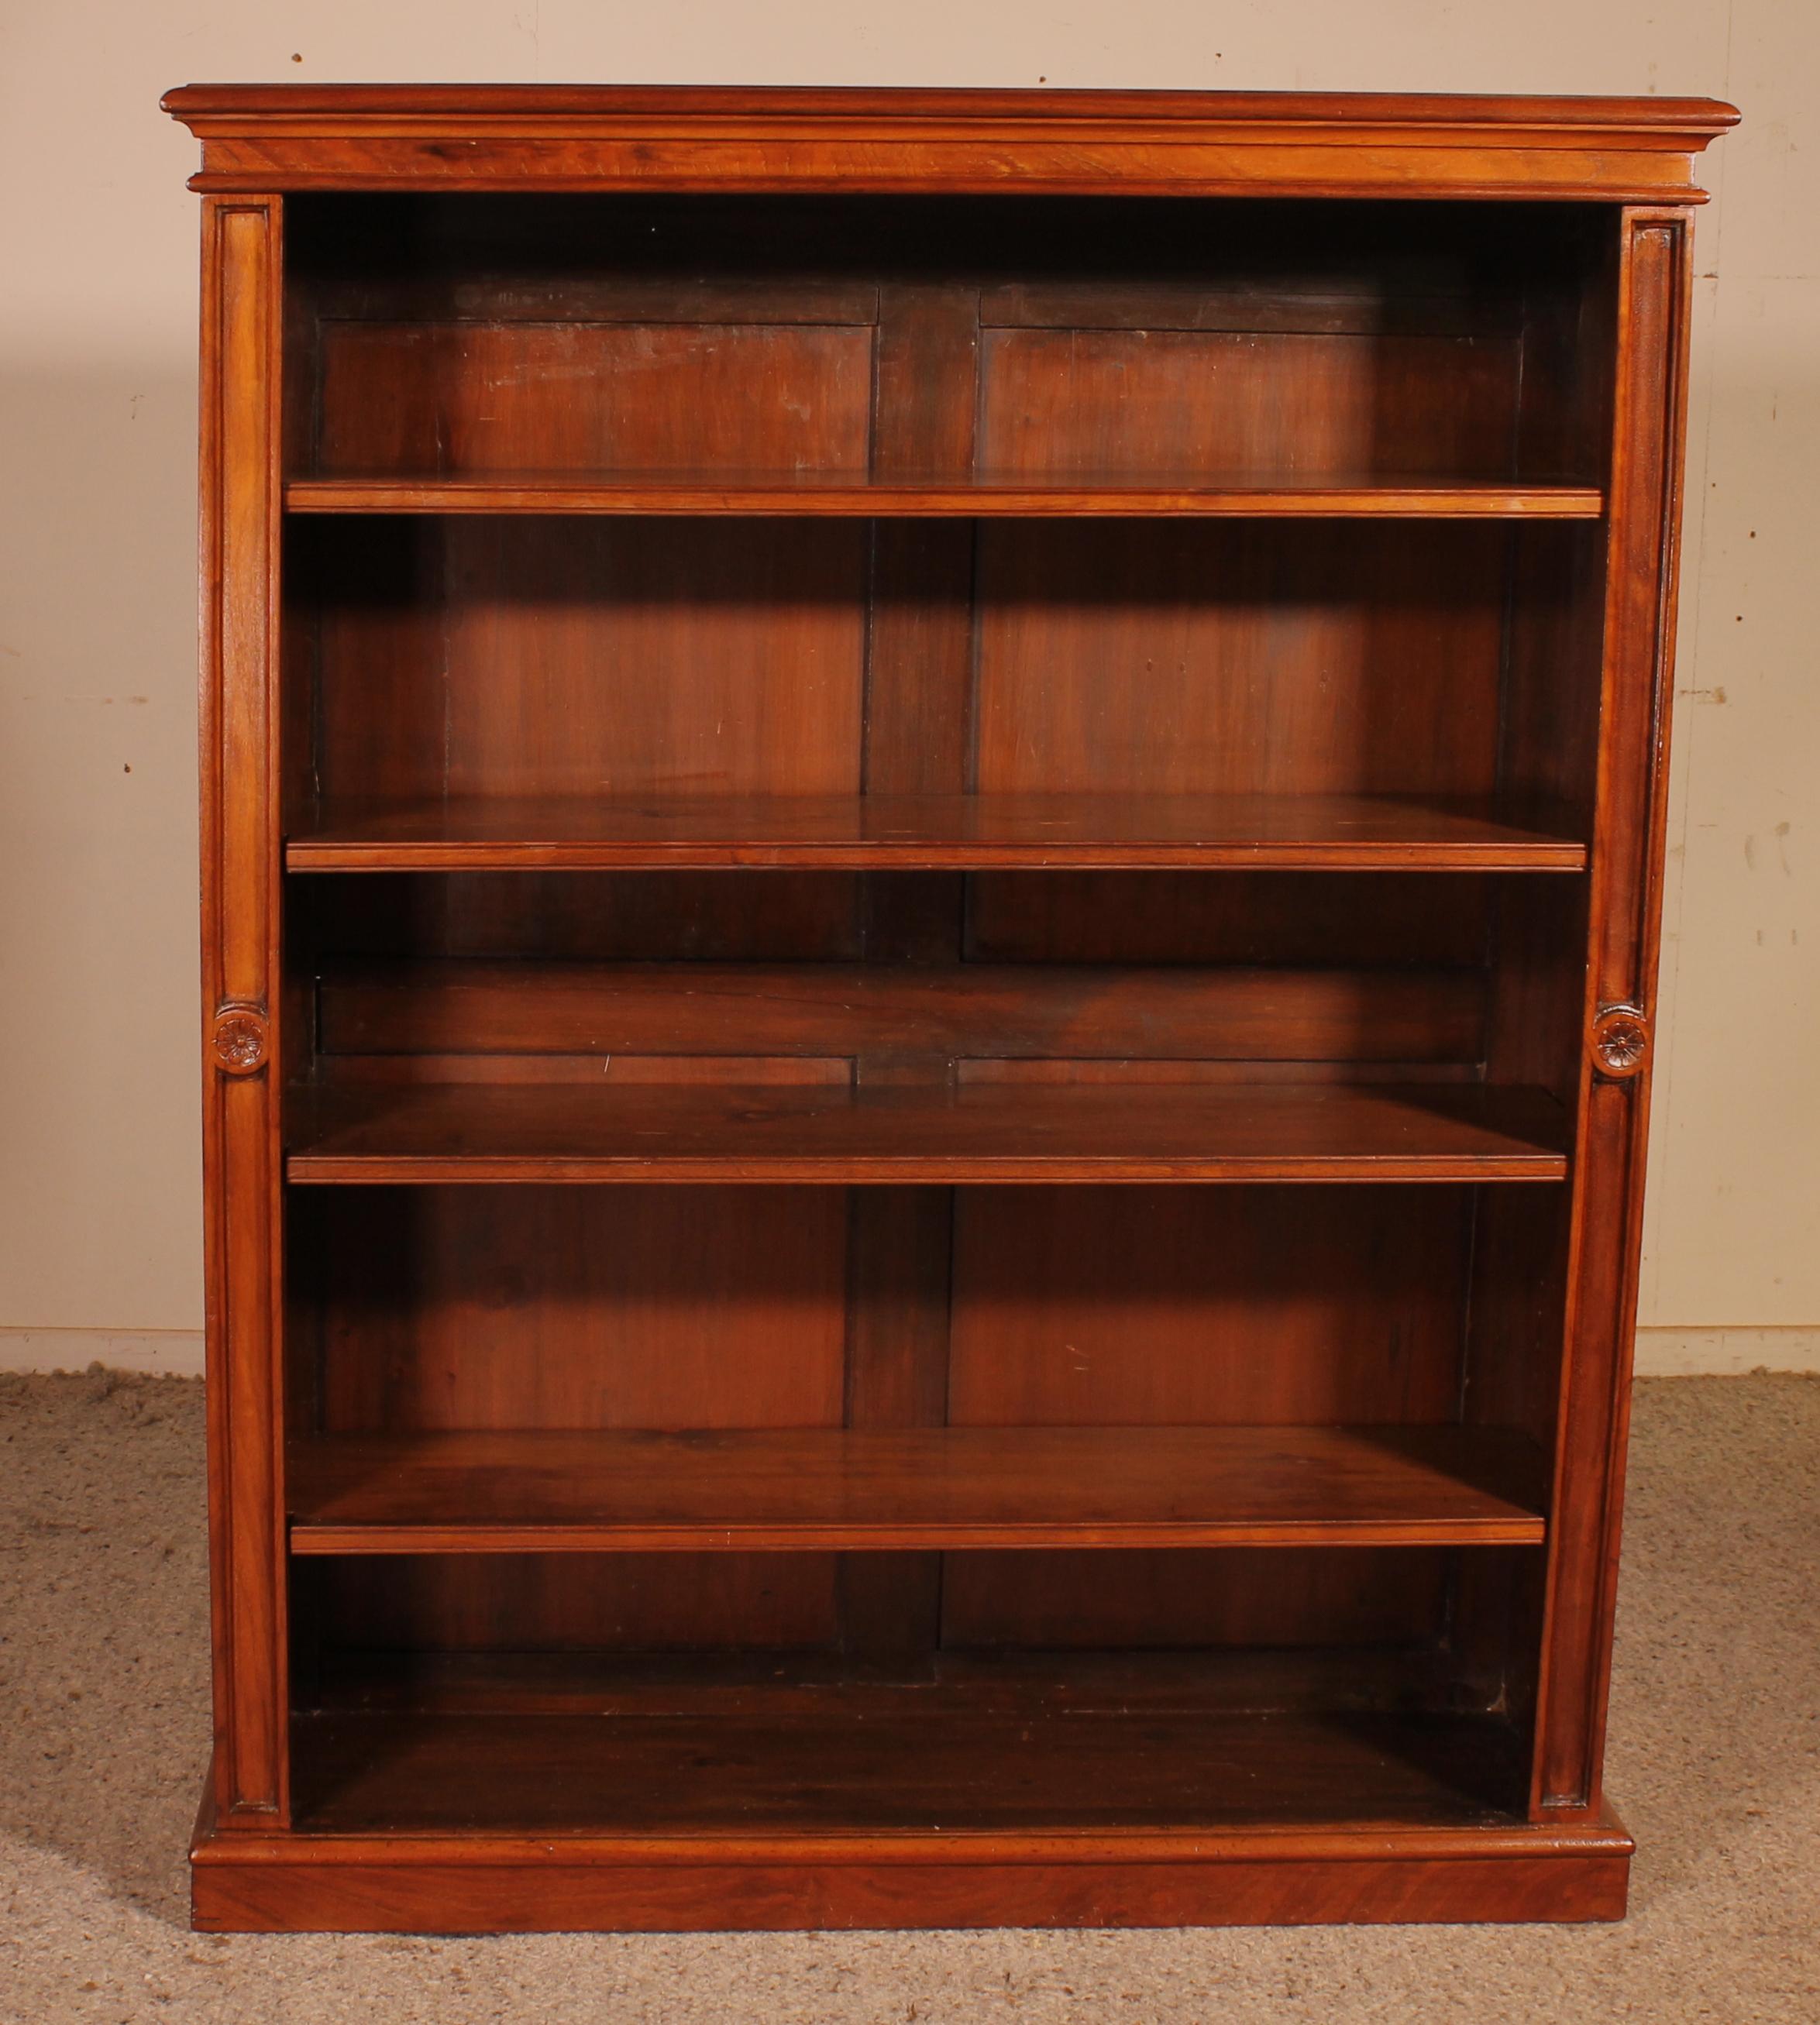 Elegant open bookcase in walnut from the 19th century from England.
Very beautiful open bookcase of large size, which is unusual. In addition It is unusual to find them a walnut.
The bookcase is well proportioned and has adjustable